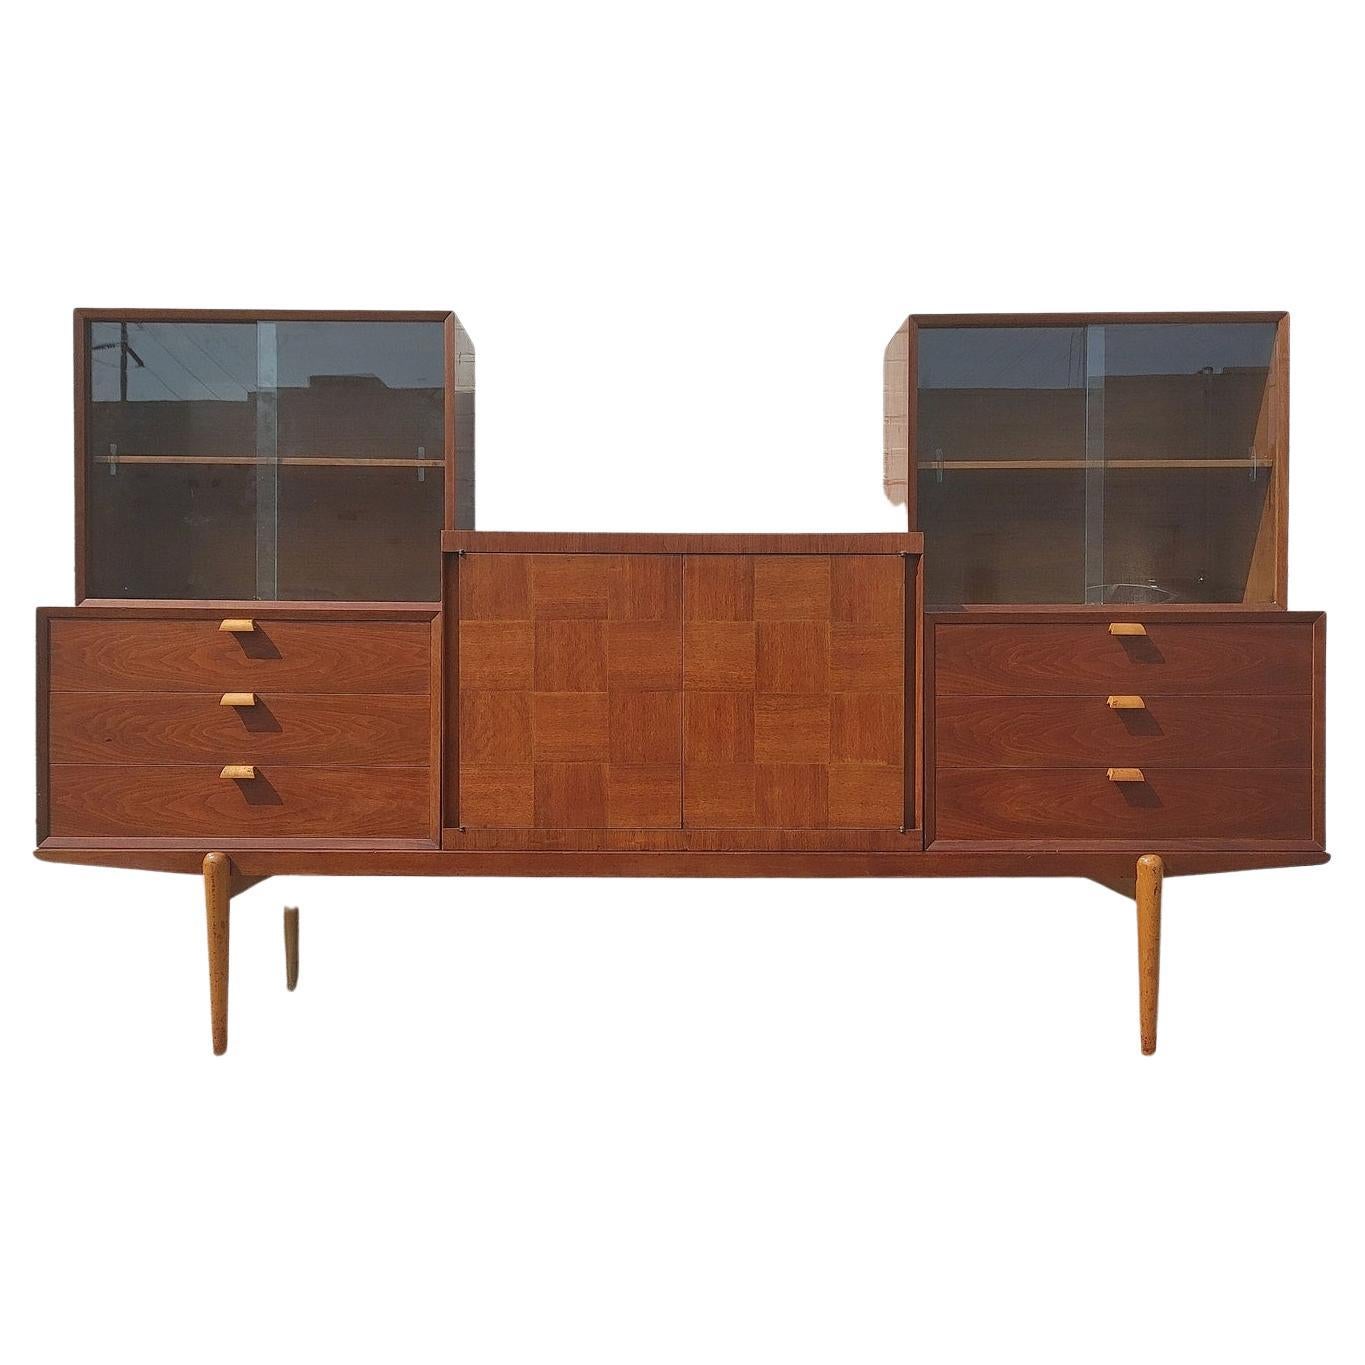 Mid Century Modern Teak and Oak Modular Wall Unit

Average vintage condition and structurally sound. Has some expected finish wear and scratching. Very unique piece offering options on placement of five cabinets. Checkered cabinet has rings and some